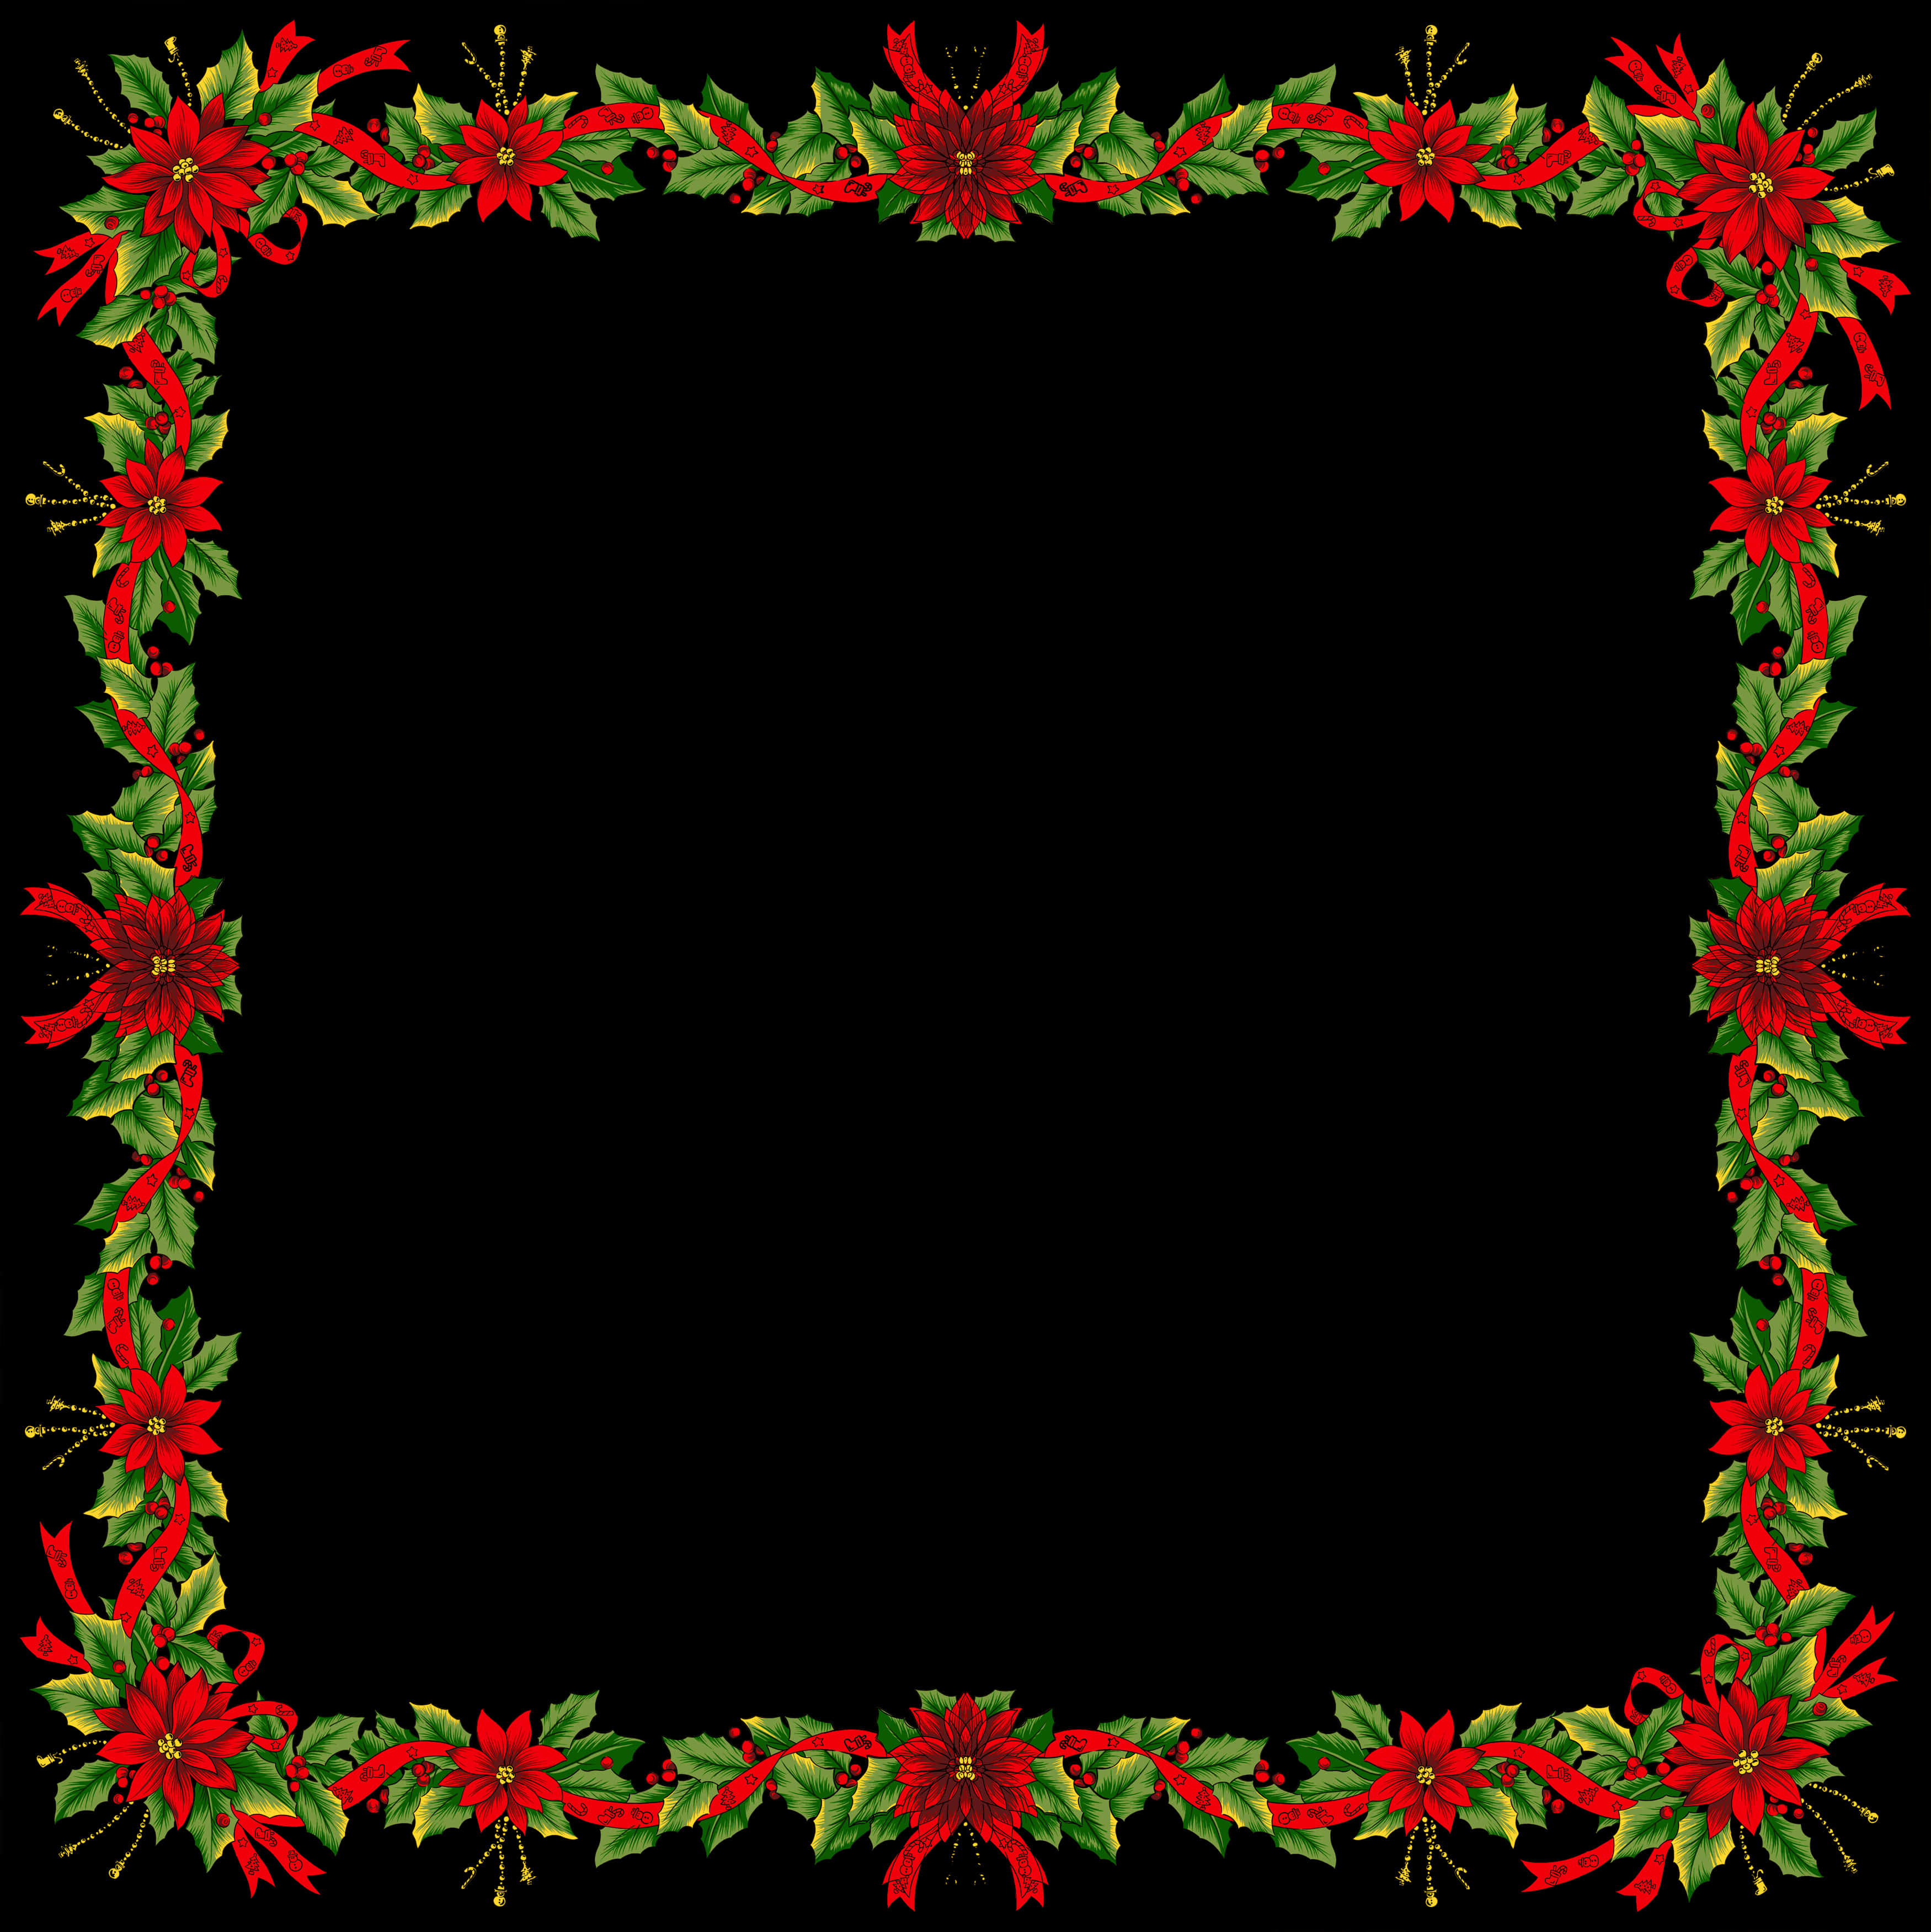 A Square Frame Of Red And Green Flowers